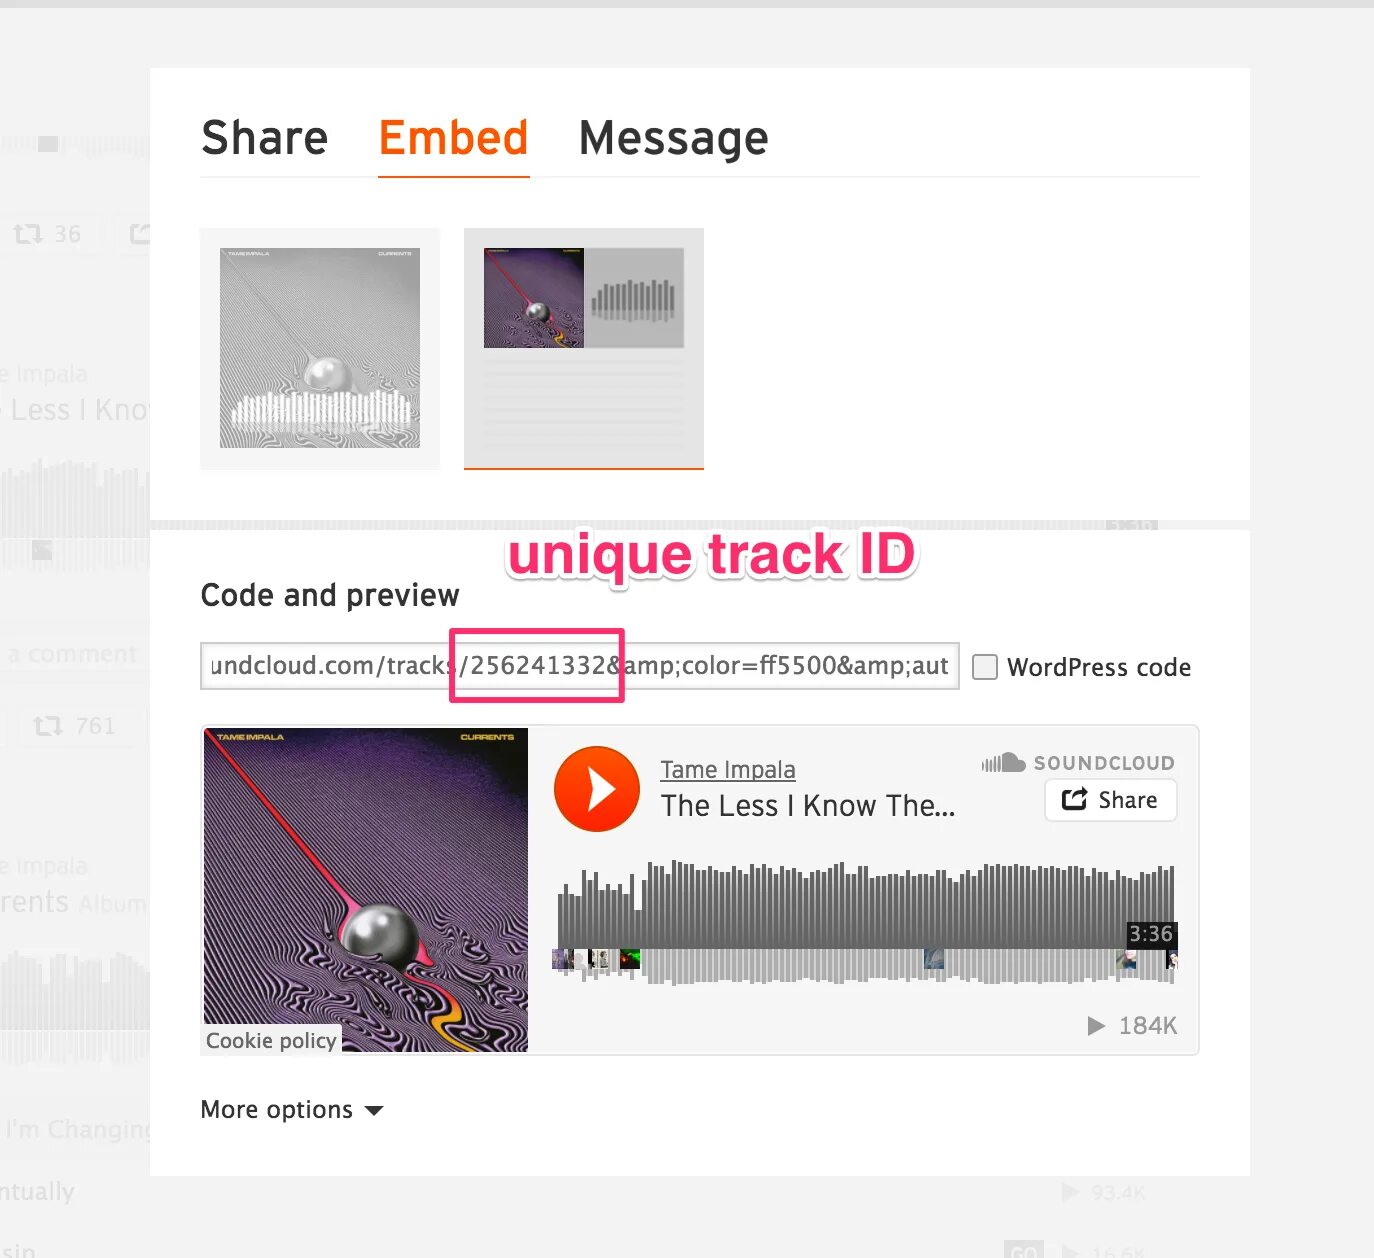 Message embed. Embed code. Что такое эмбед код. Soundcloud embed code. Embed кнопка.